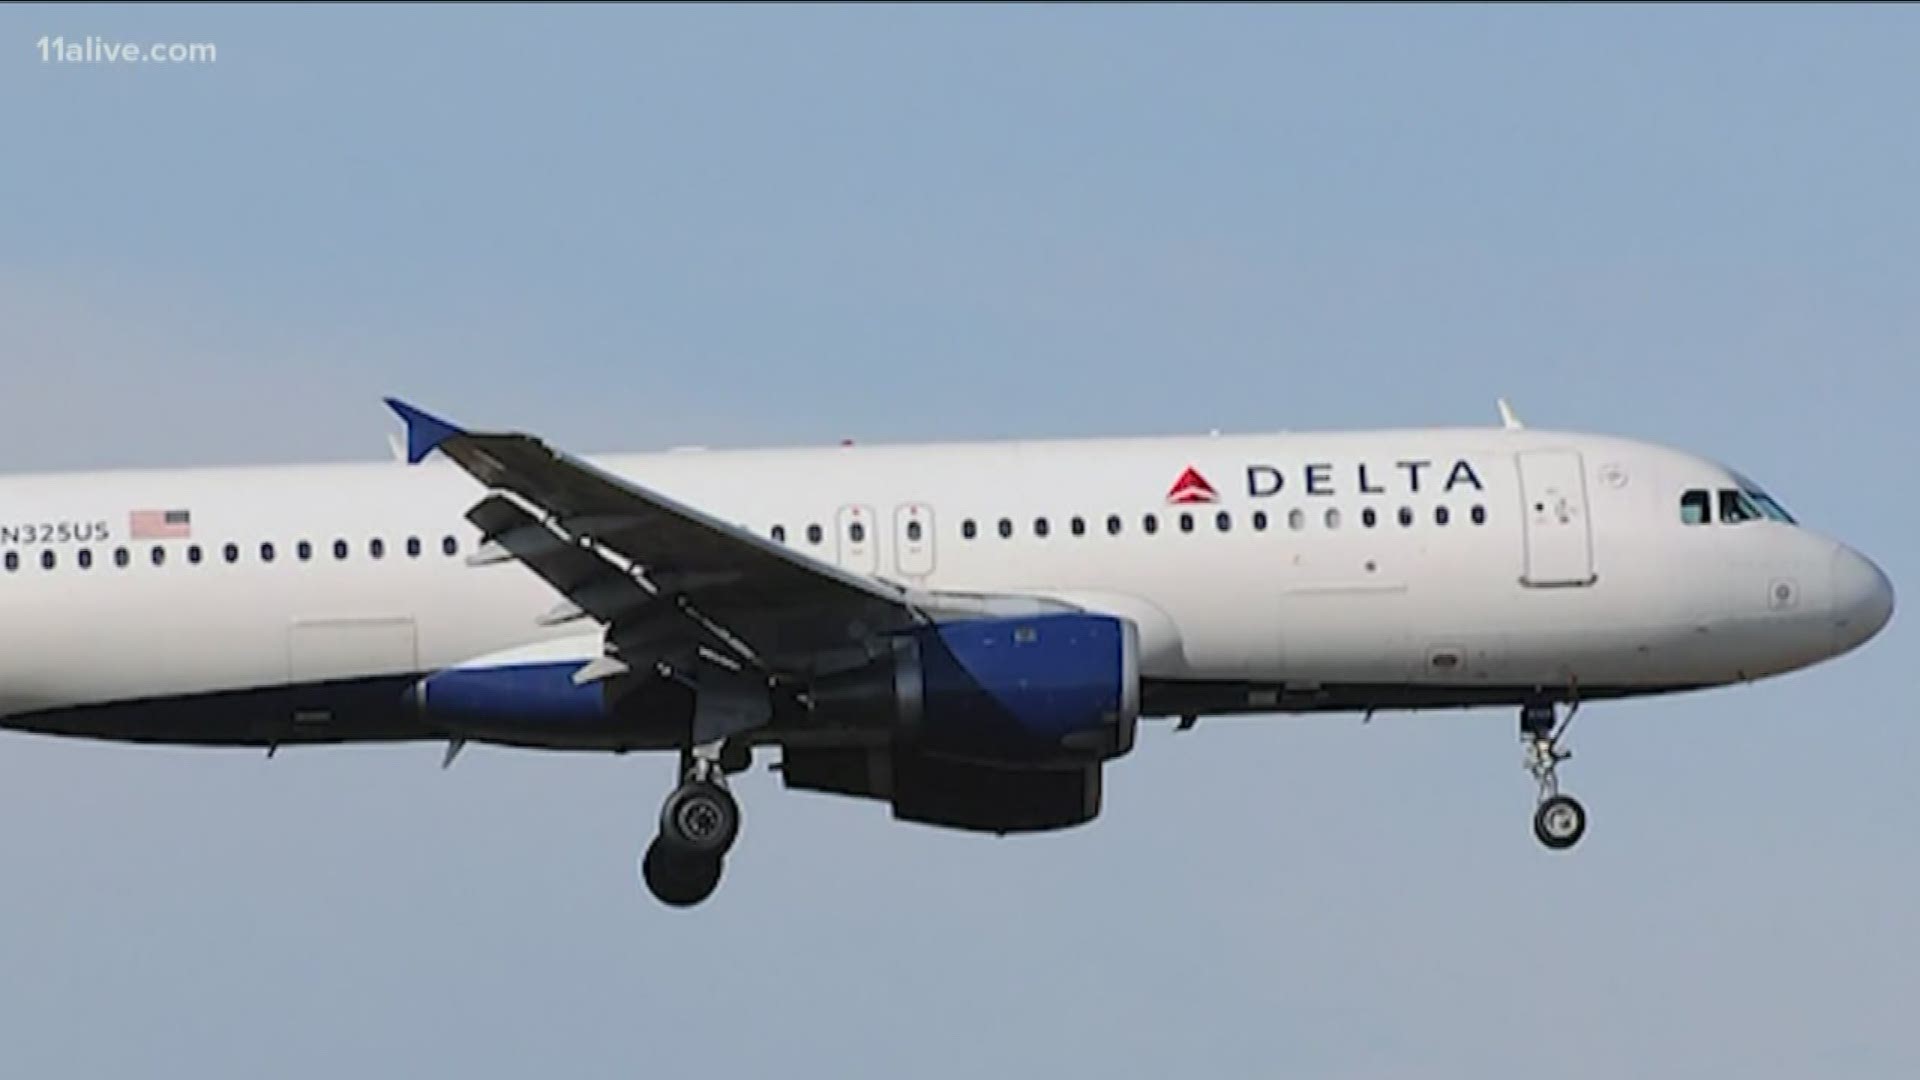 Delta is planning a major hiring spree from now until 2020.